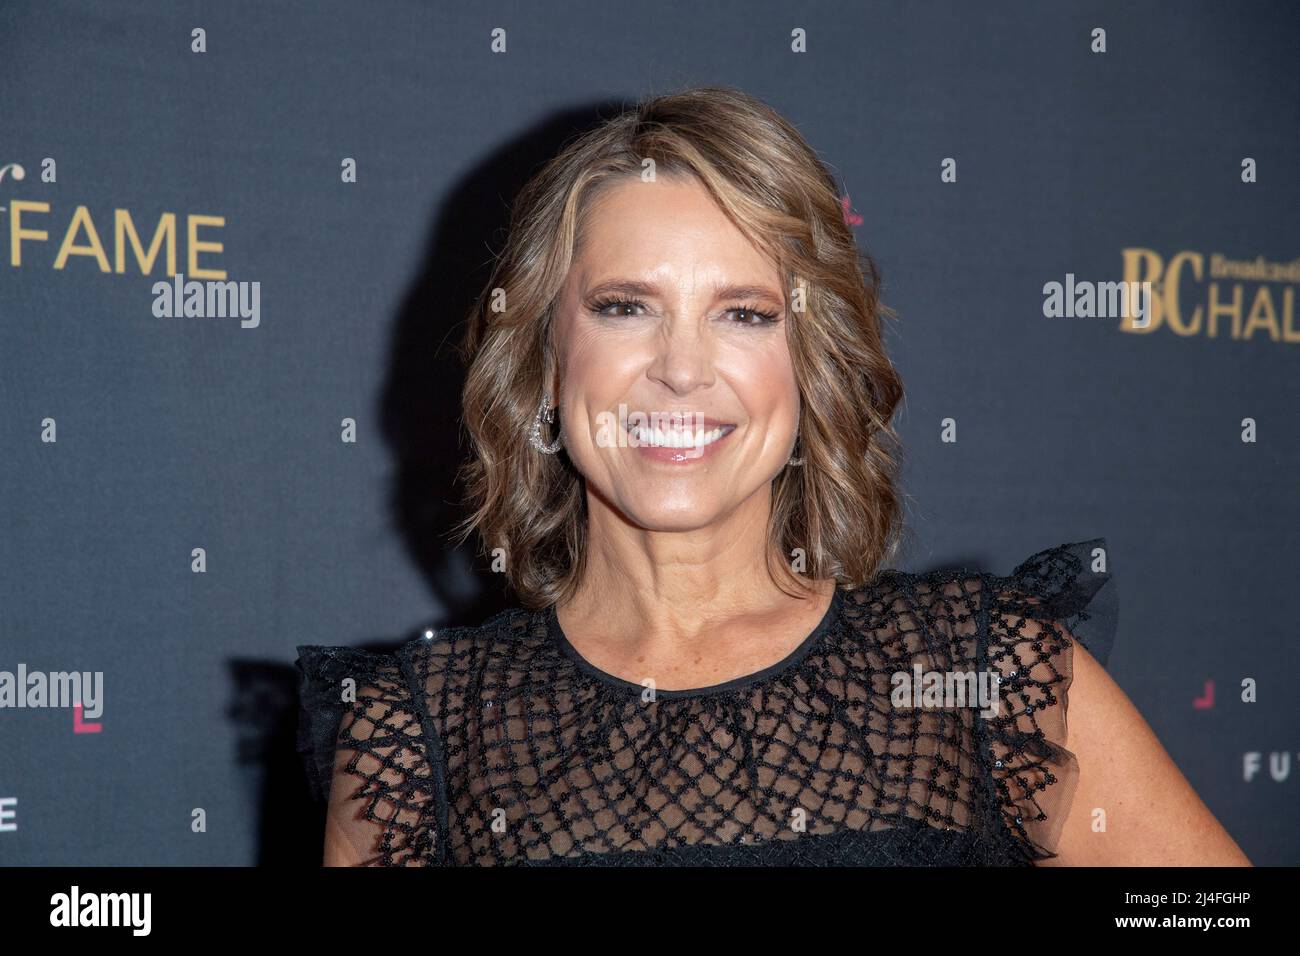 New York, USA. 14th Apr 2022. NEW YORK, NEW YORK - APRIL 14: Hannah Storm attends the 2022 Broadcasting & Cable Hall of Fame at The Ziegfeld Ballroom on April 14, 2022 in New York City. Credit: Ron Adar/Alamy Live News Stock Photo